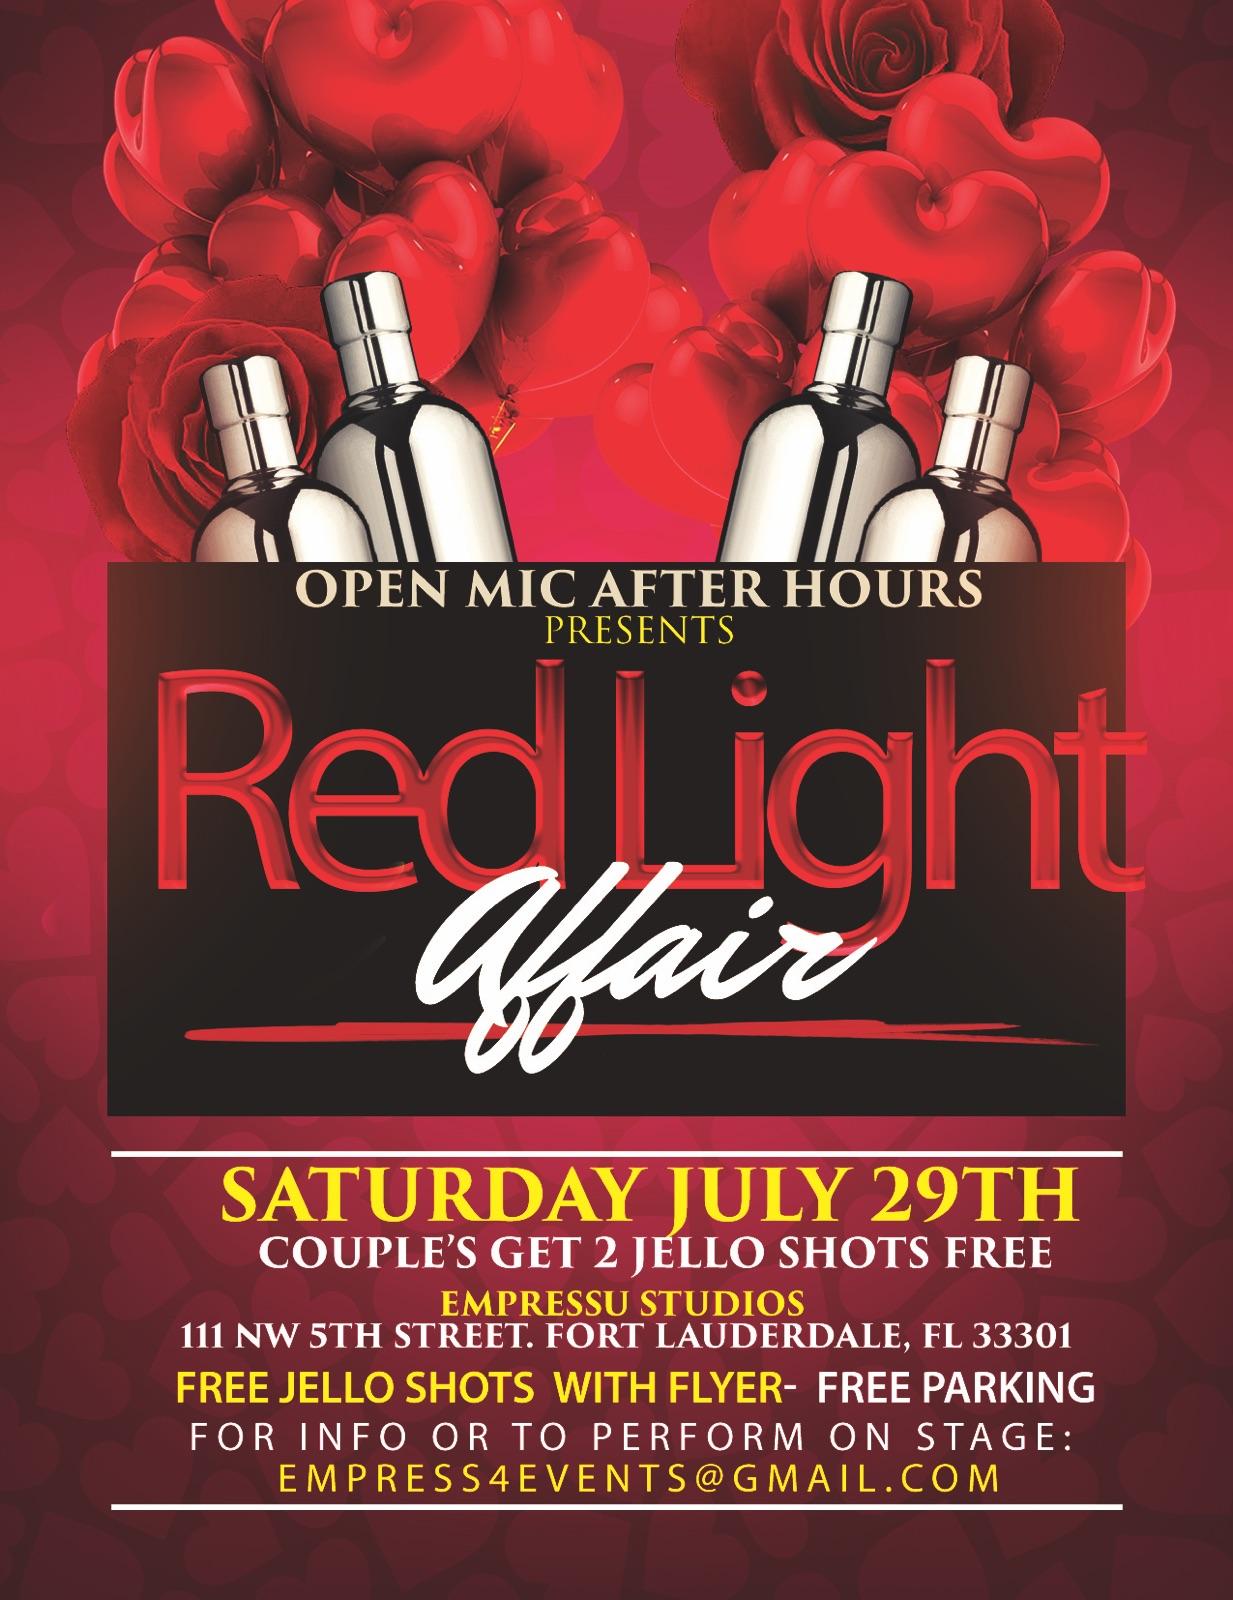 Open Mic After Hours Red Light Affair